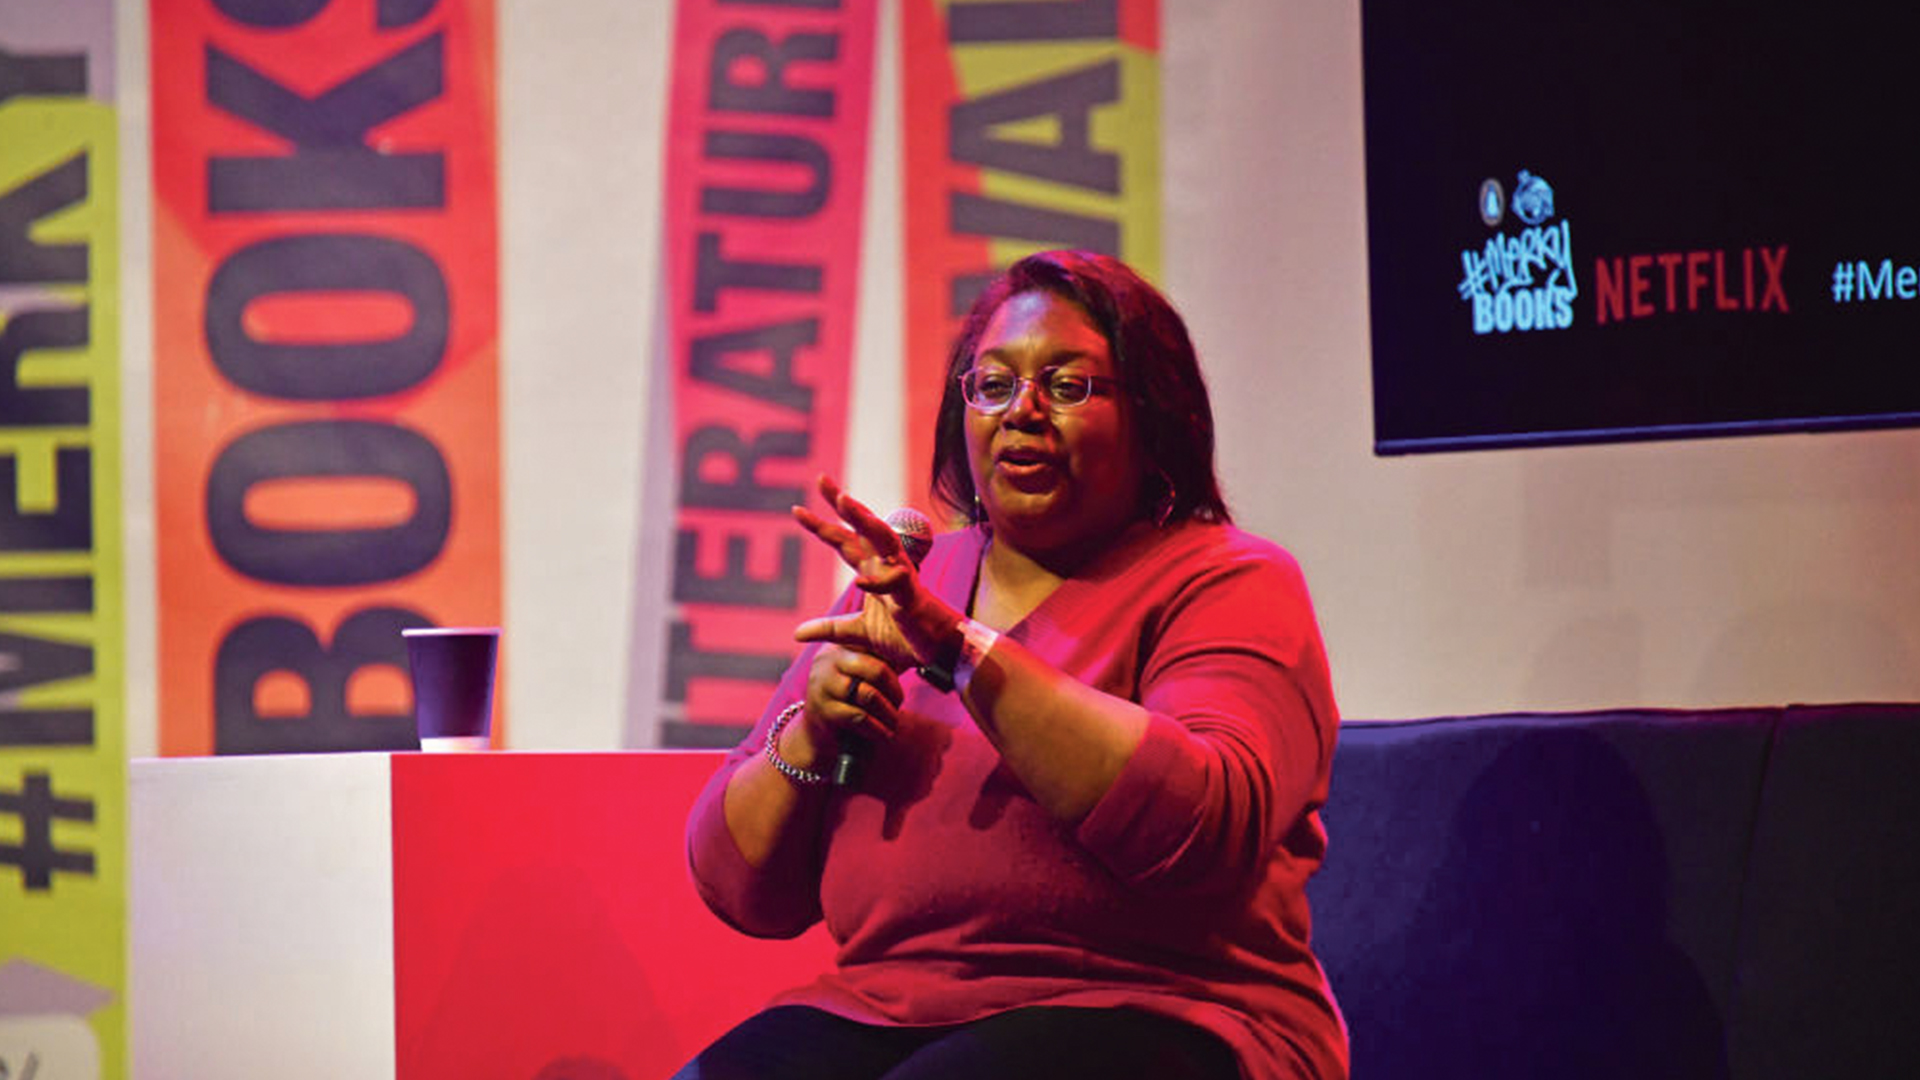 Malorie Blackman: “As a teenager, I never read books by black authors”